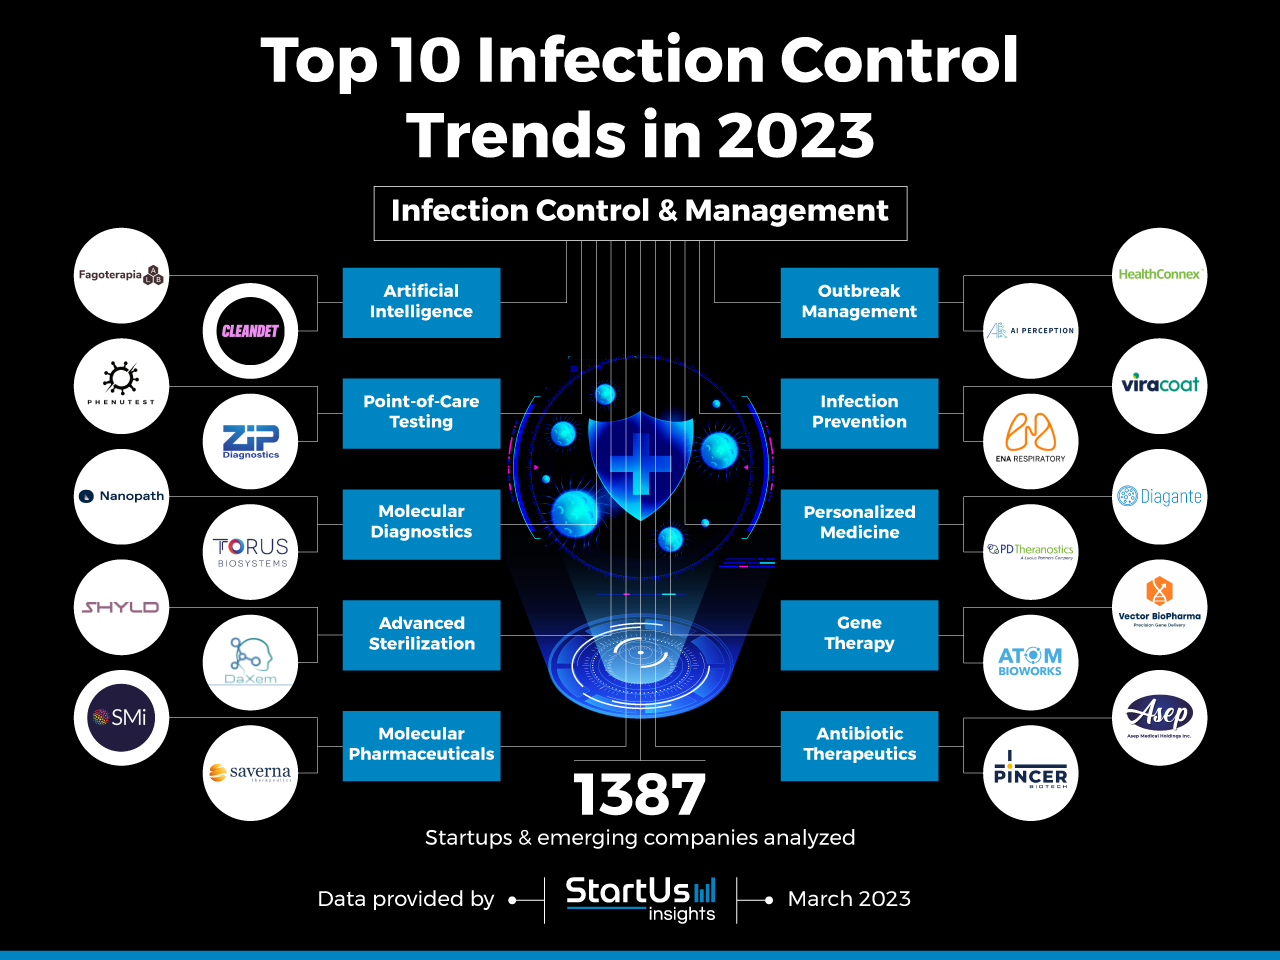 Top 10 Trends impacting Infection Control in 2023